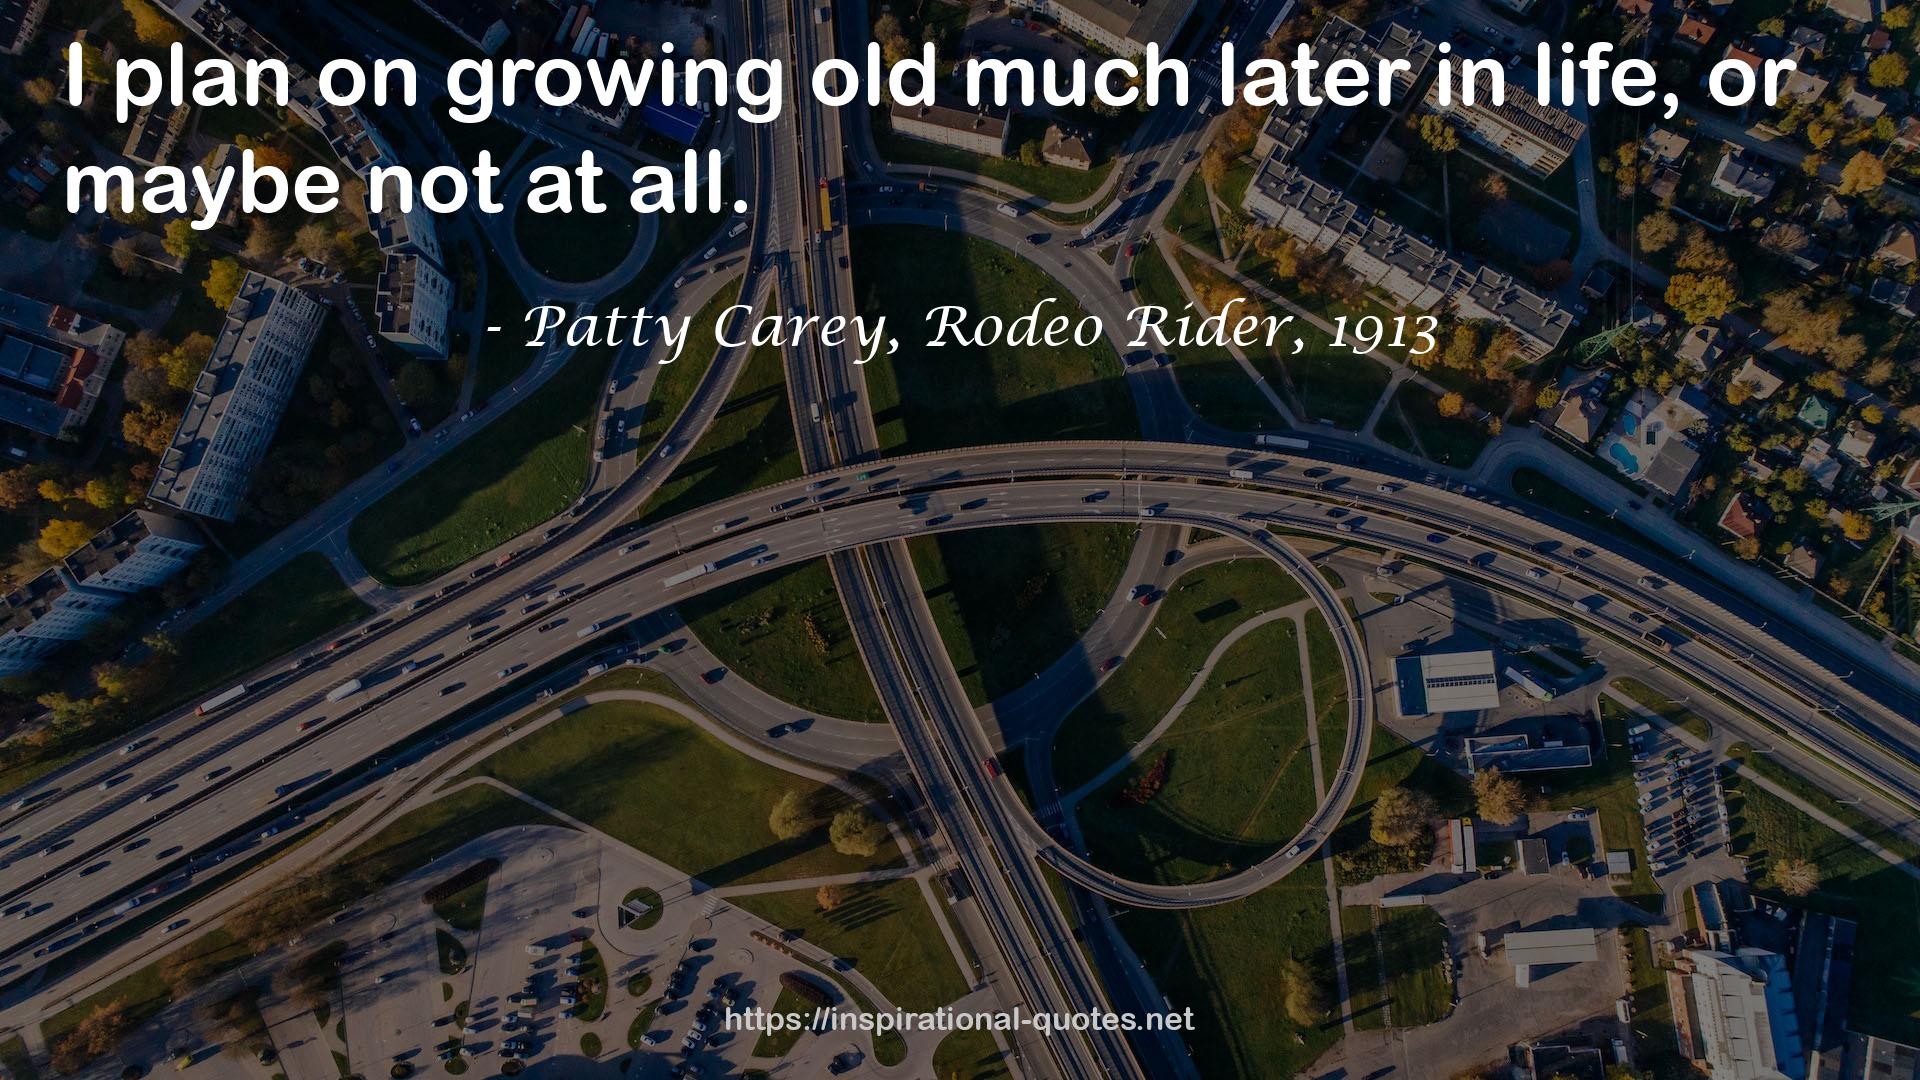 Patty Carey, Rodeo Rider, 1913 QUOTES